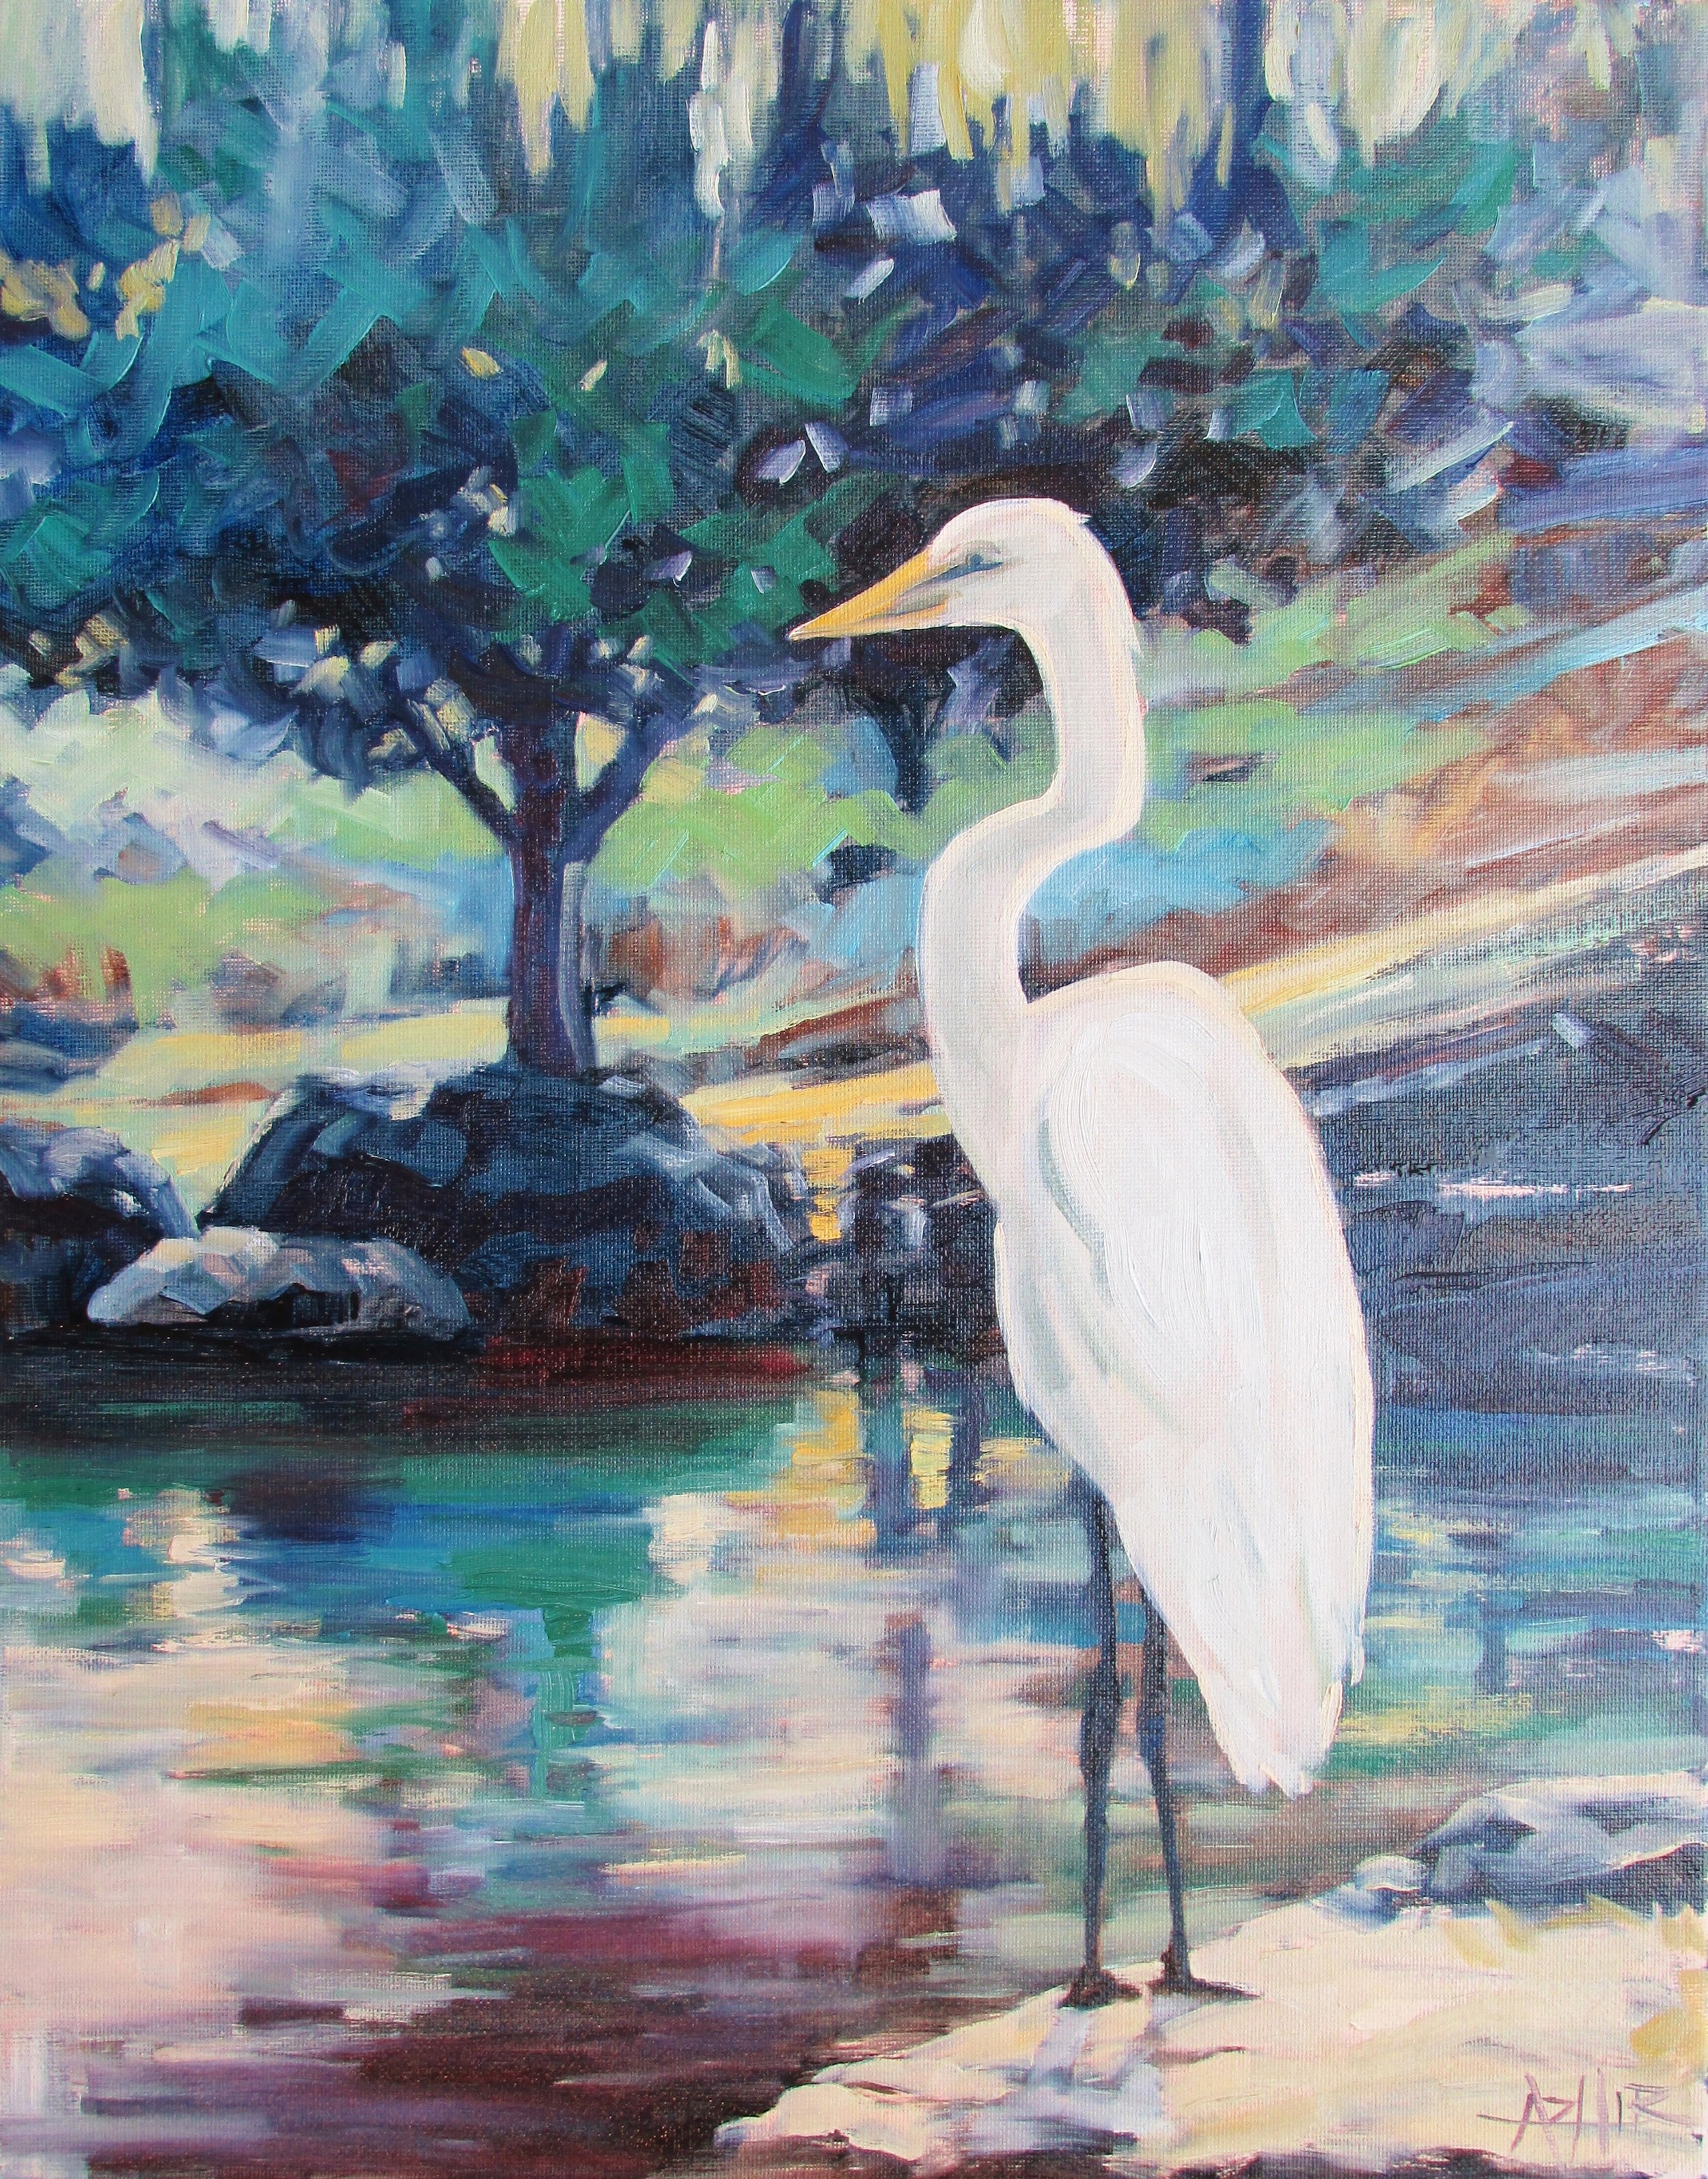 SOLD, The Egret, Copyright 2017, Oil on Canvas, 16" x 20"